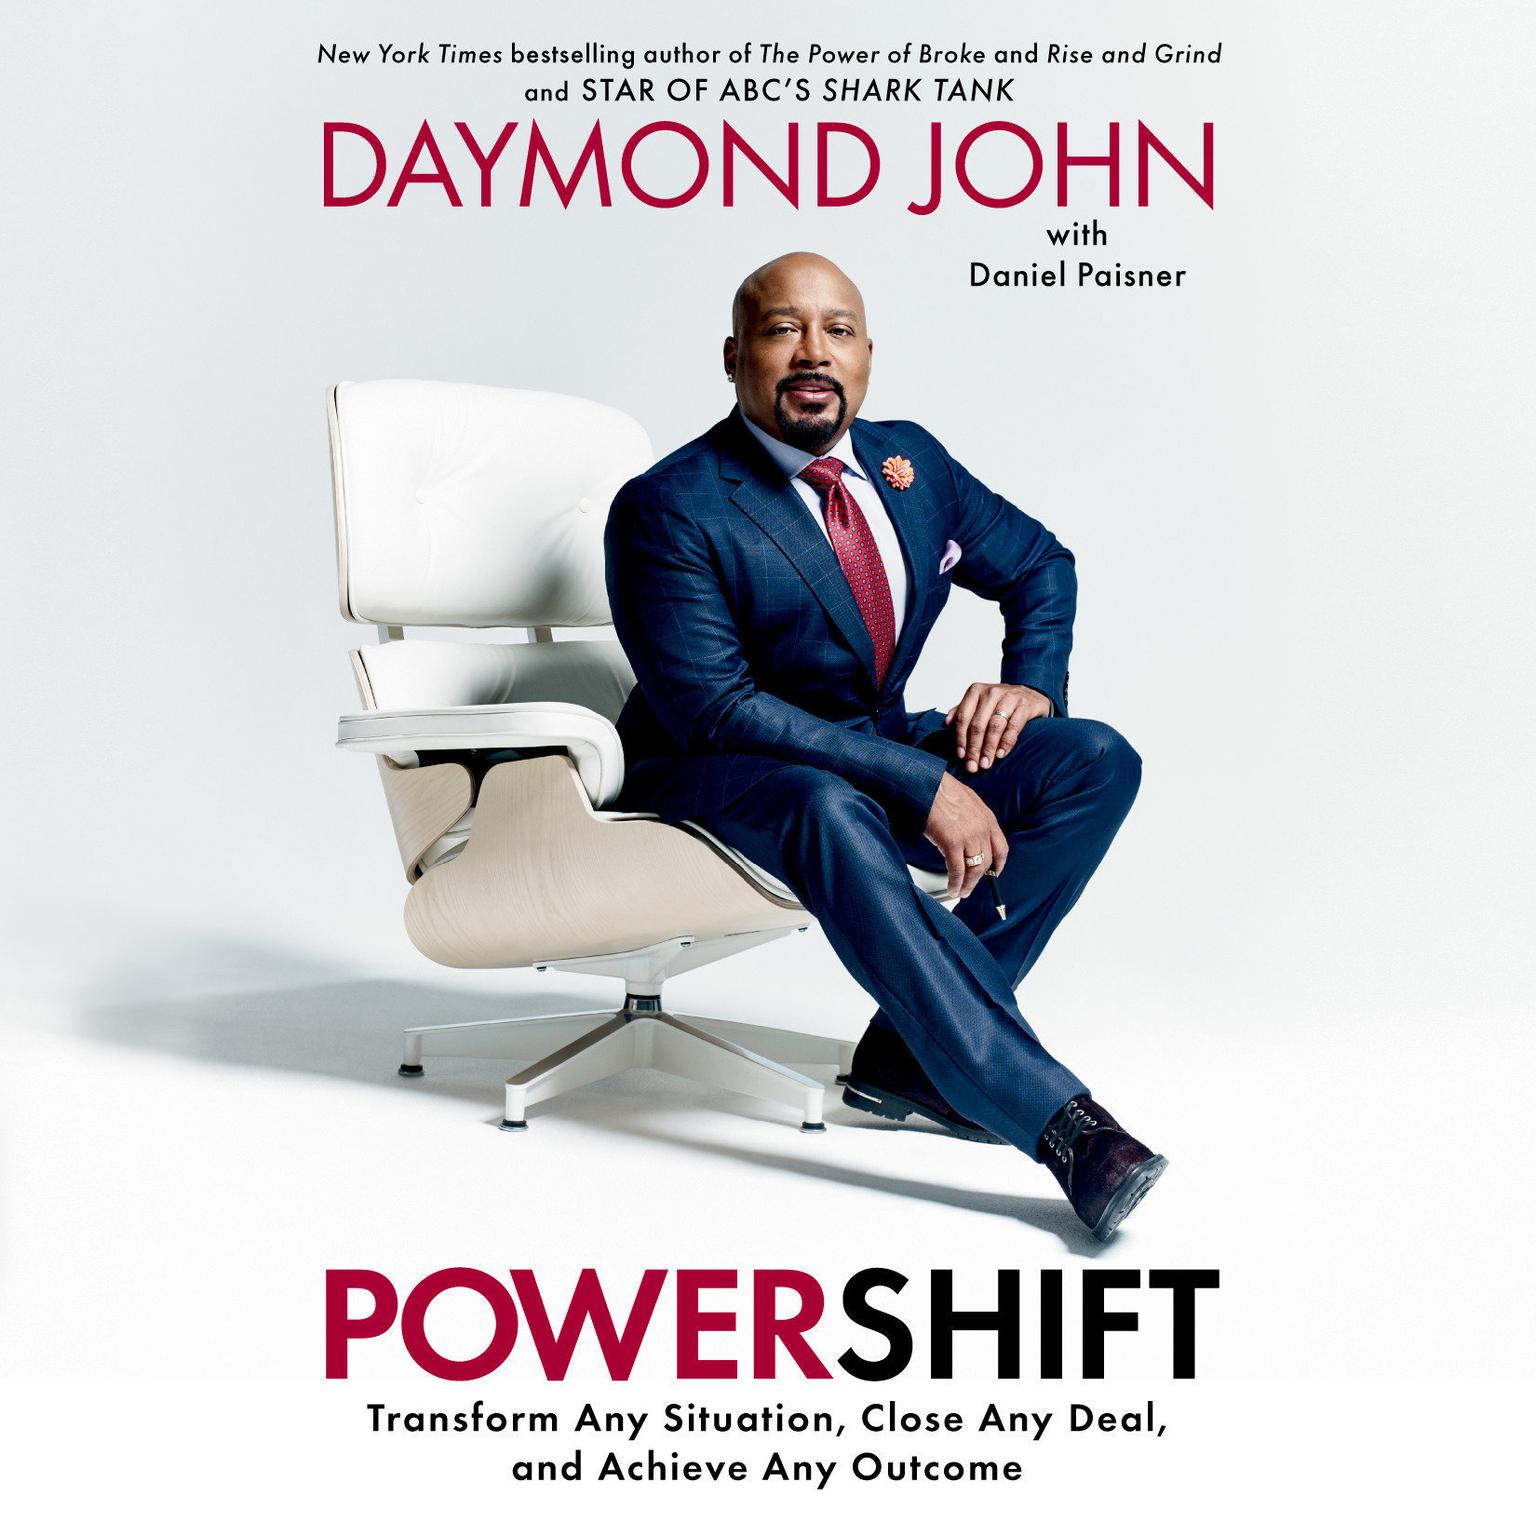 Powershift: Transform Any Situation, Close Any Deal, and Achieve Any Outcome Audiobook, by Daniel Paisner